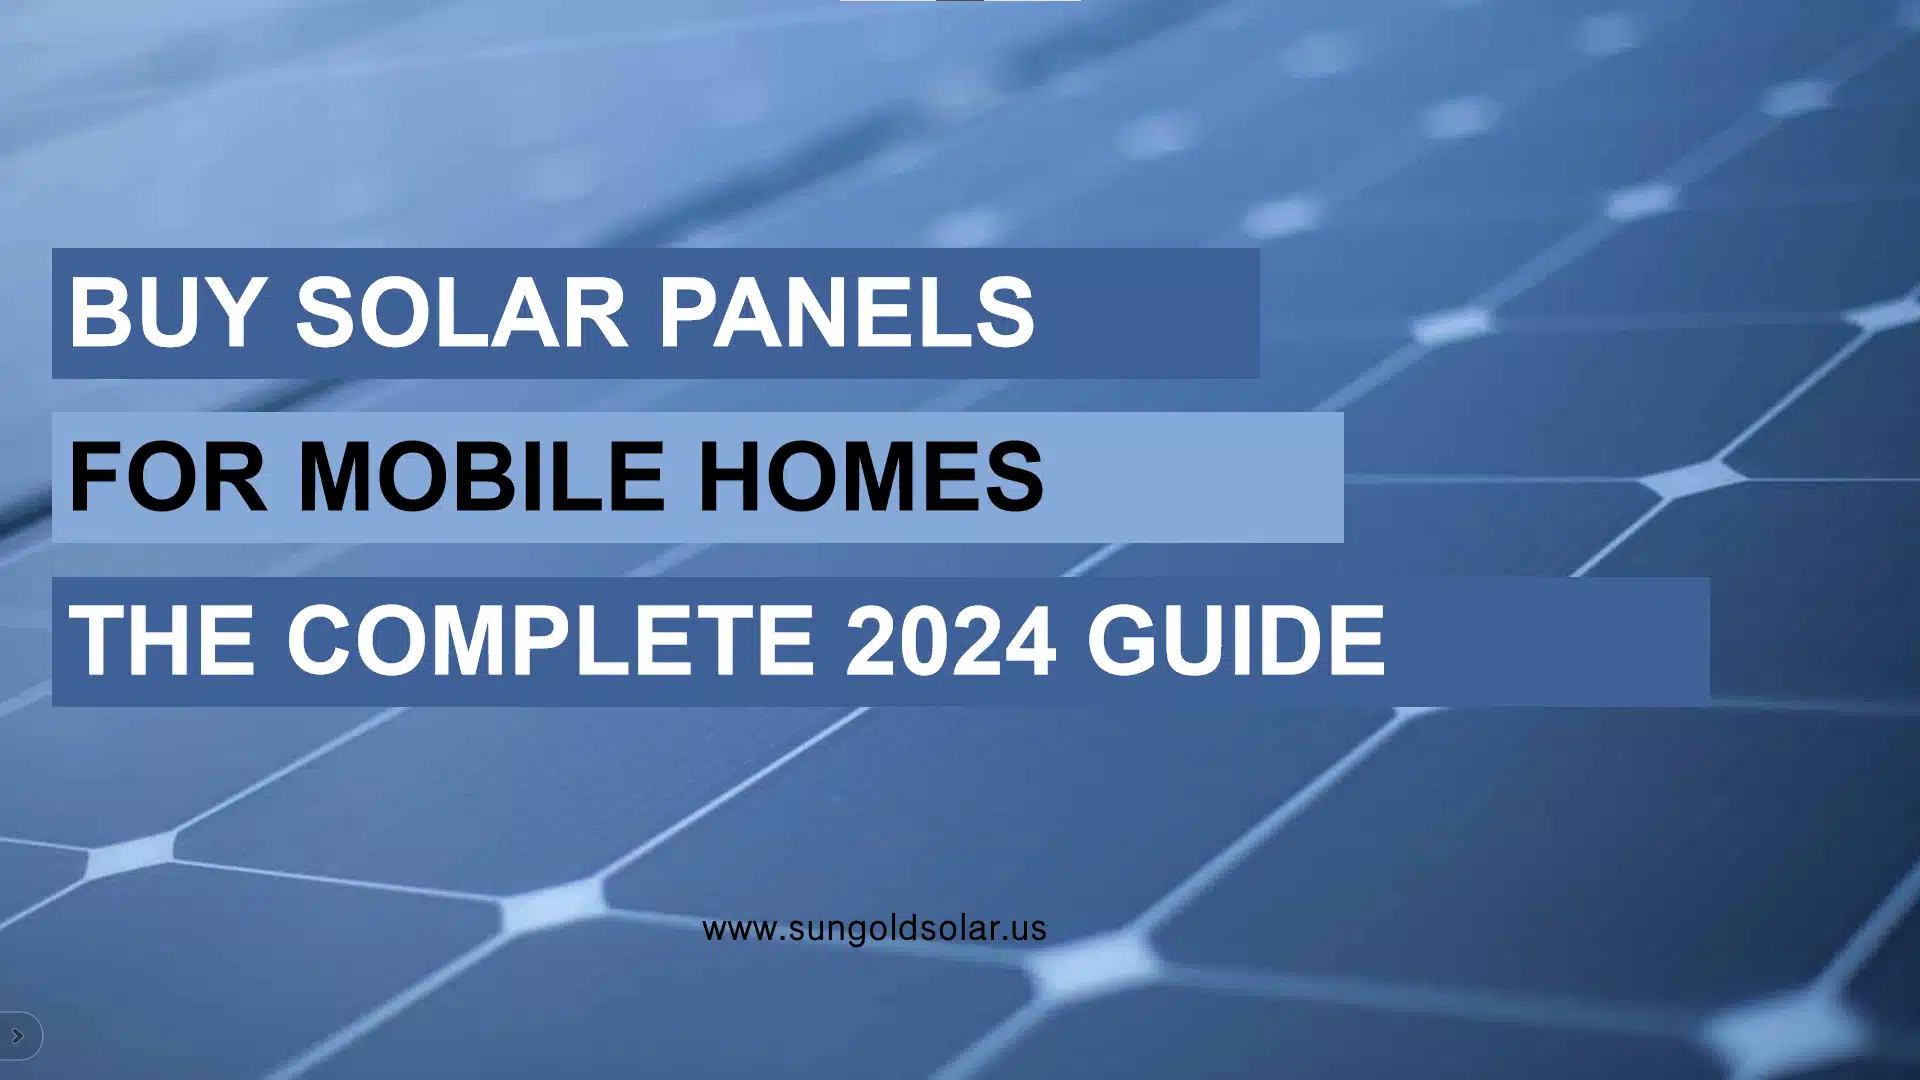 Buy Solar Panels for Mobile Homes The Complete 2024 Guide